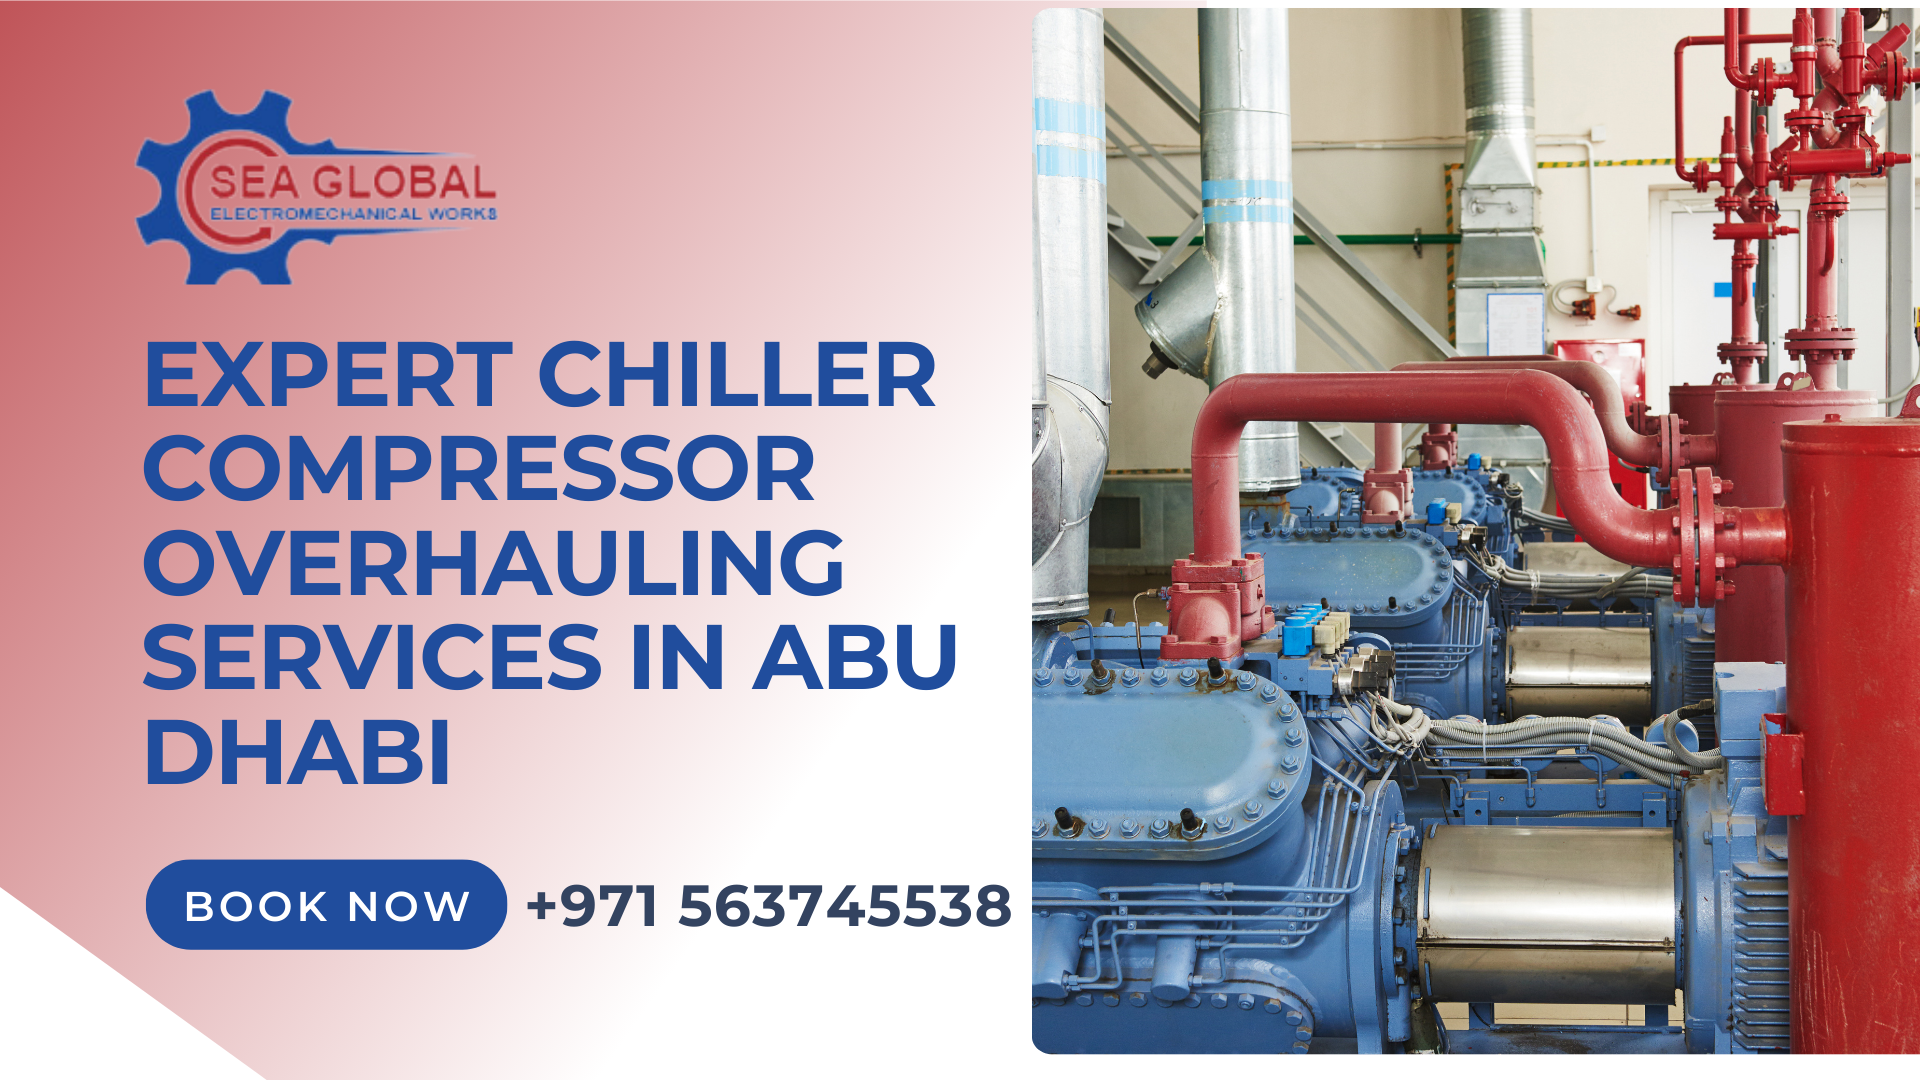 Expert Chiller Compressor Overhauling Services in Abu Dhabi